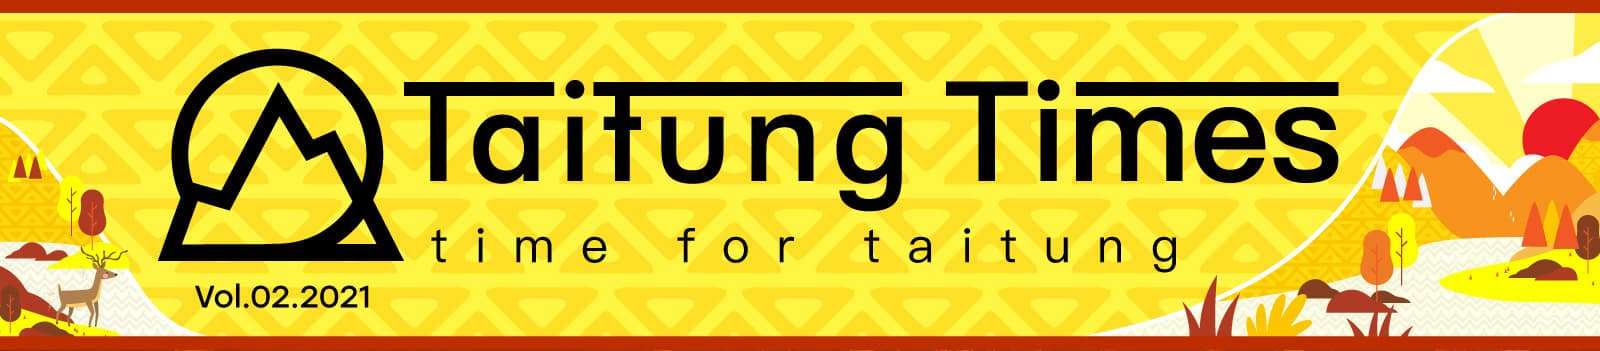 Taitung Times Vol.02.2021 - time for taitung